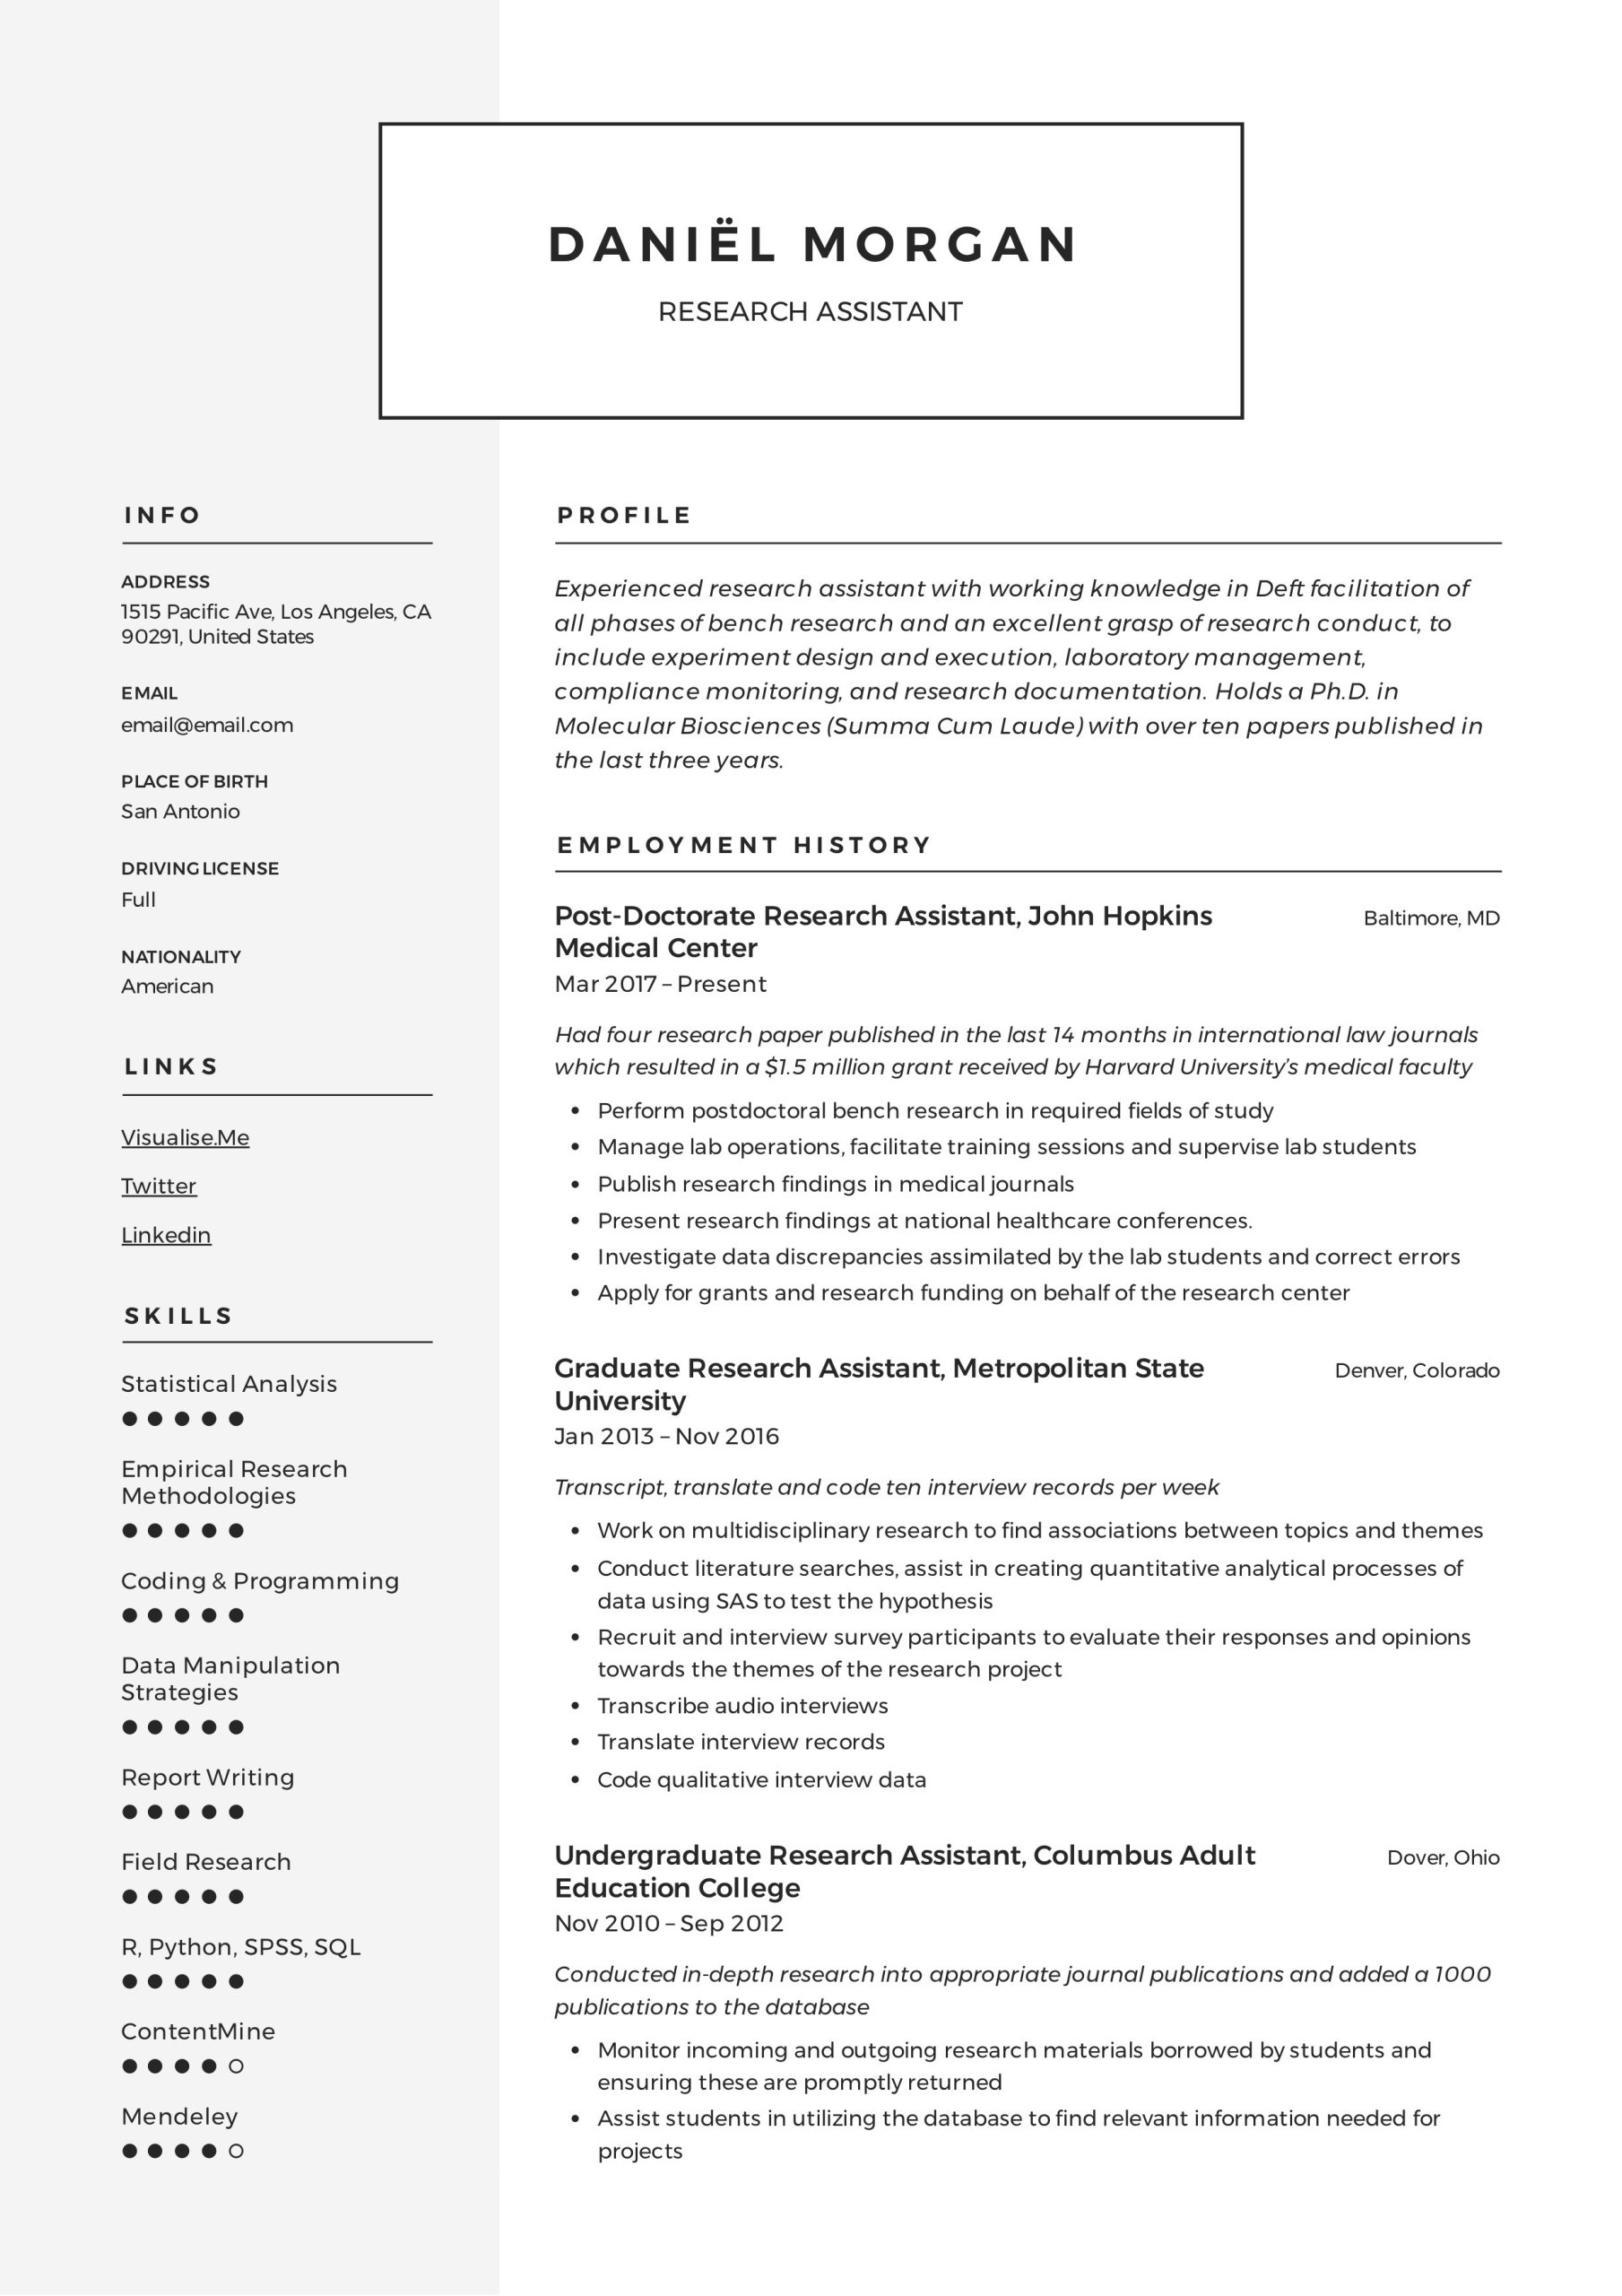 Sample Resume for Undergraduate Research assistant Research assistant Resume & Writing Guide  12 Resume Examples